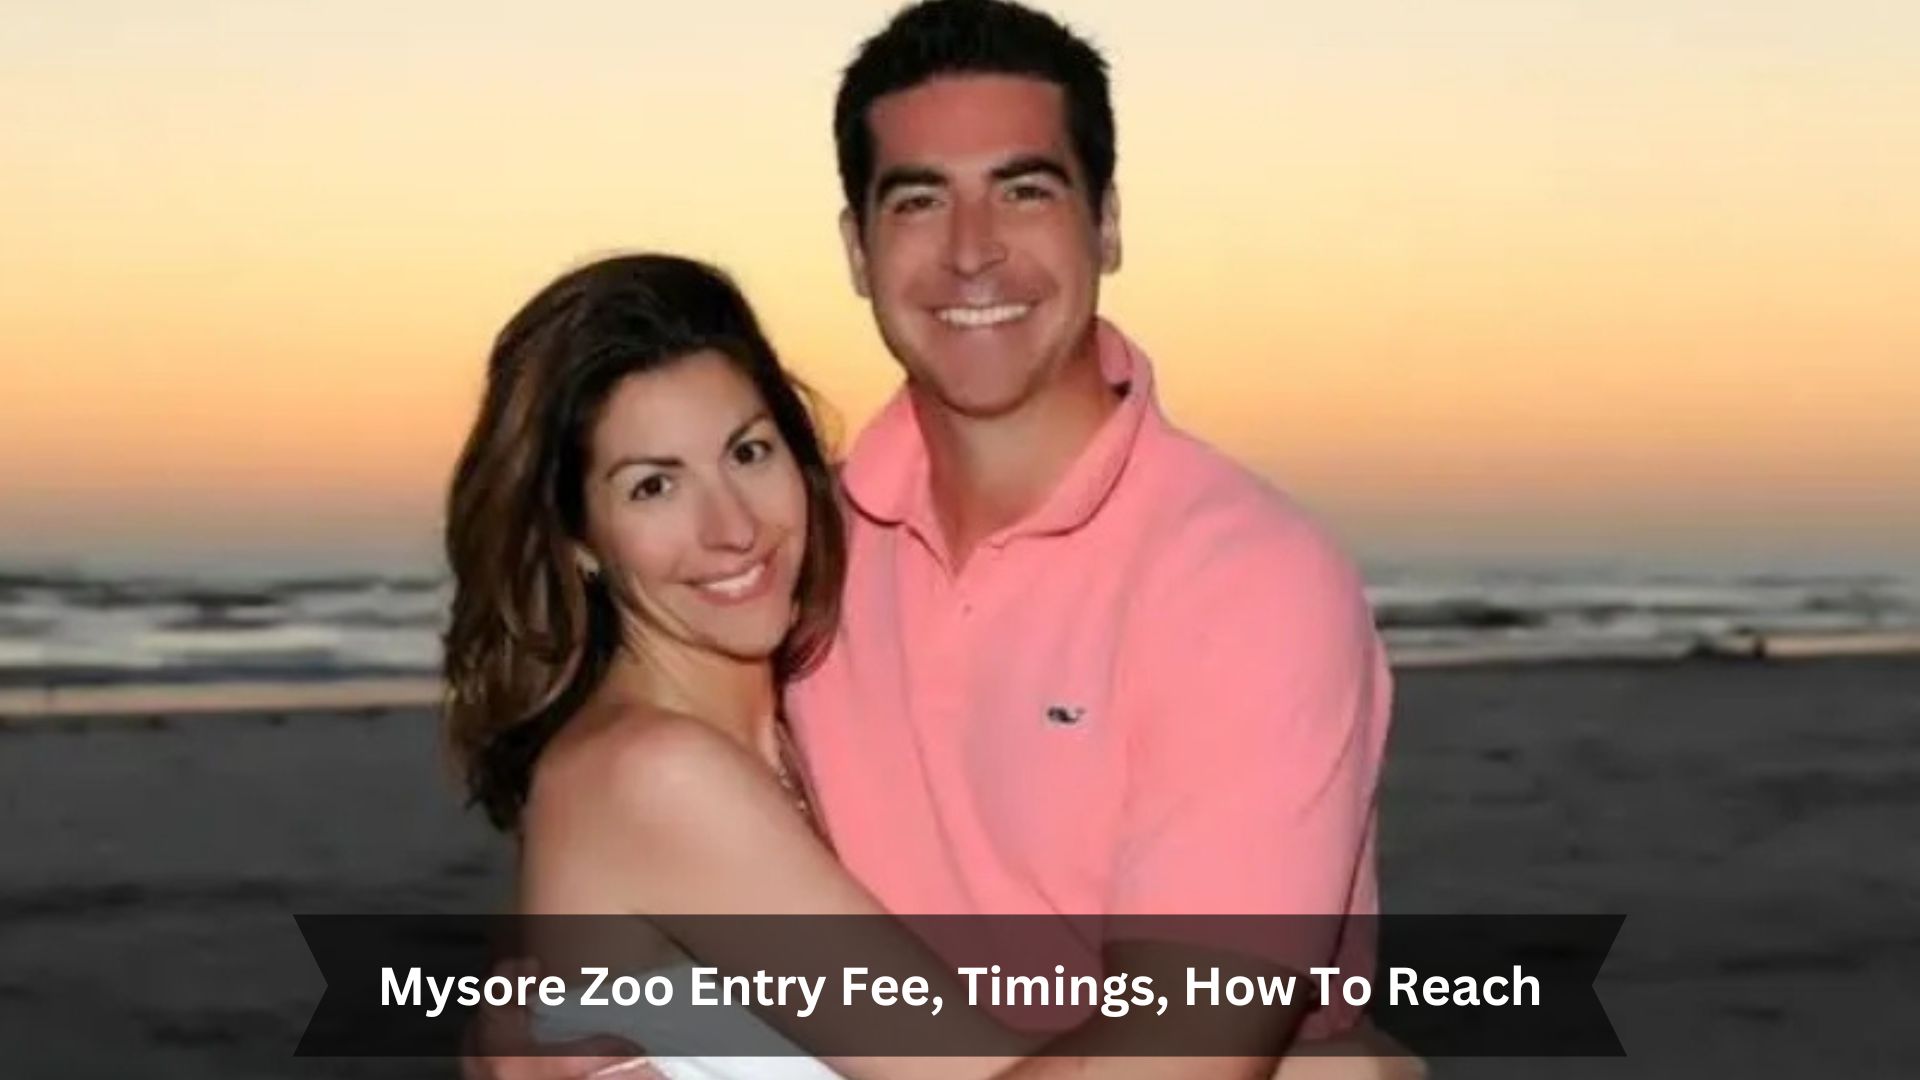 Mysore-Zoo-Entry-Fee-Timings-How-To-Reach-1